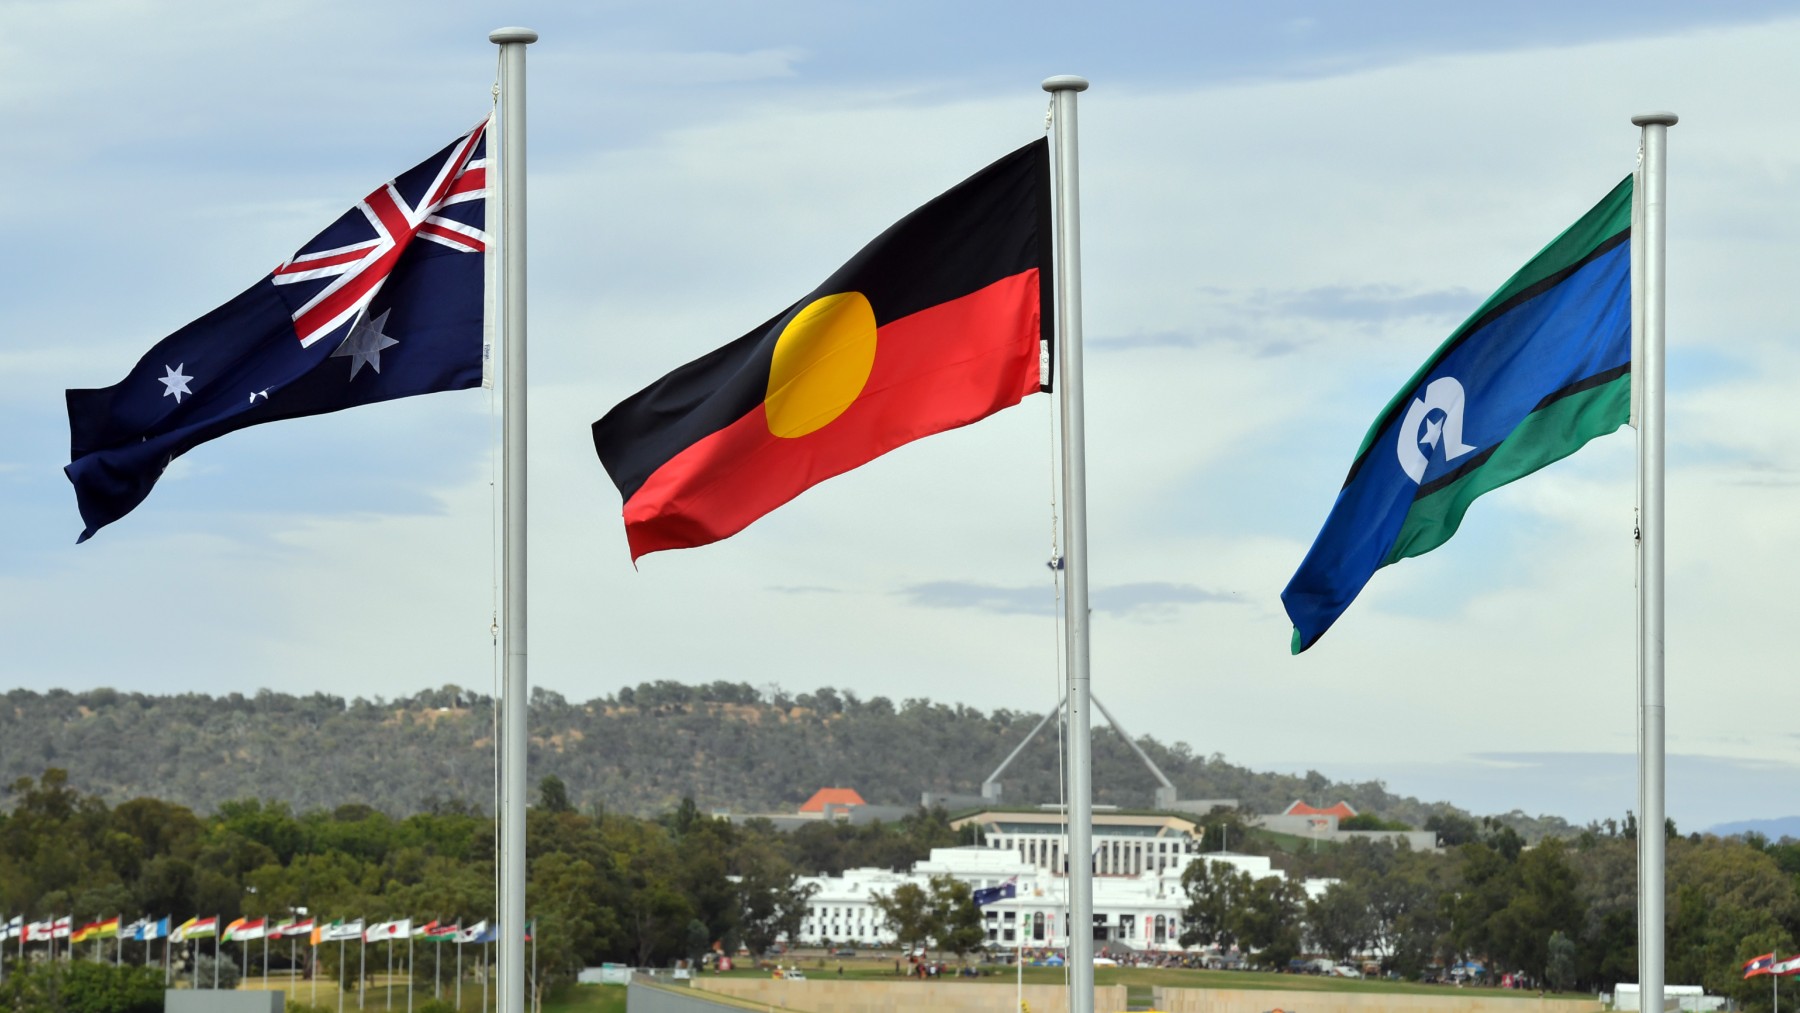 Both the Aboriginal and Torres Strait Islander flags are flown alongside the Australian national flag to acknowledge these distinct Indigenous peoples.